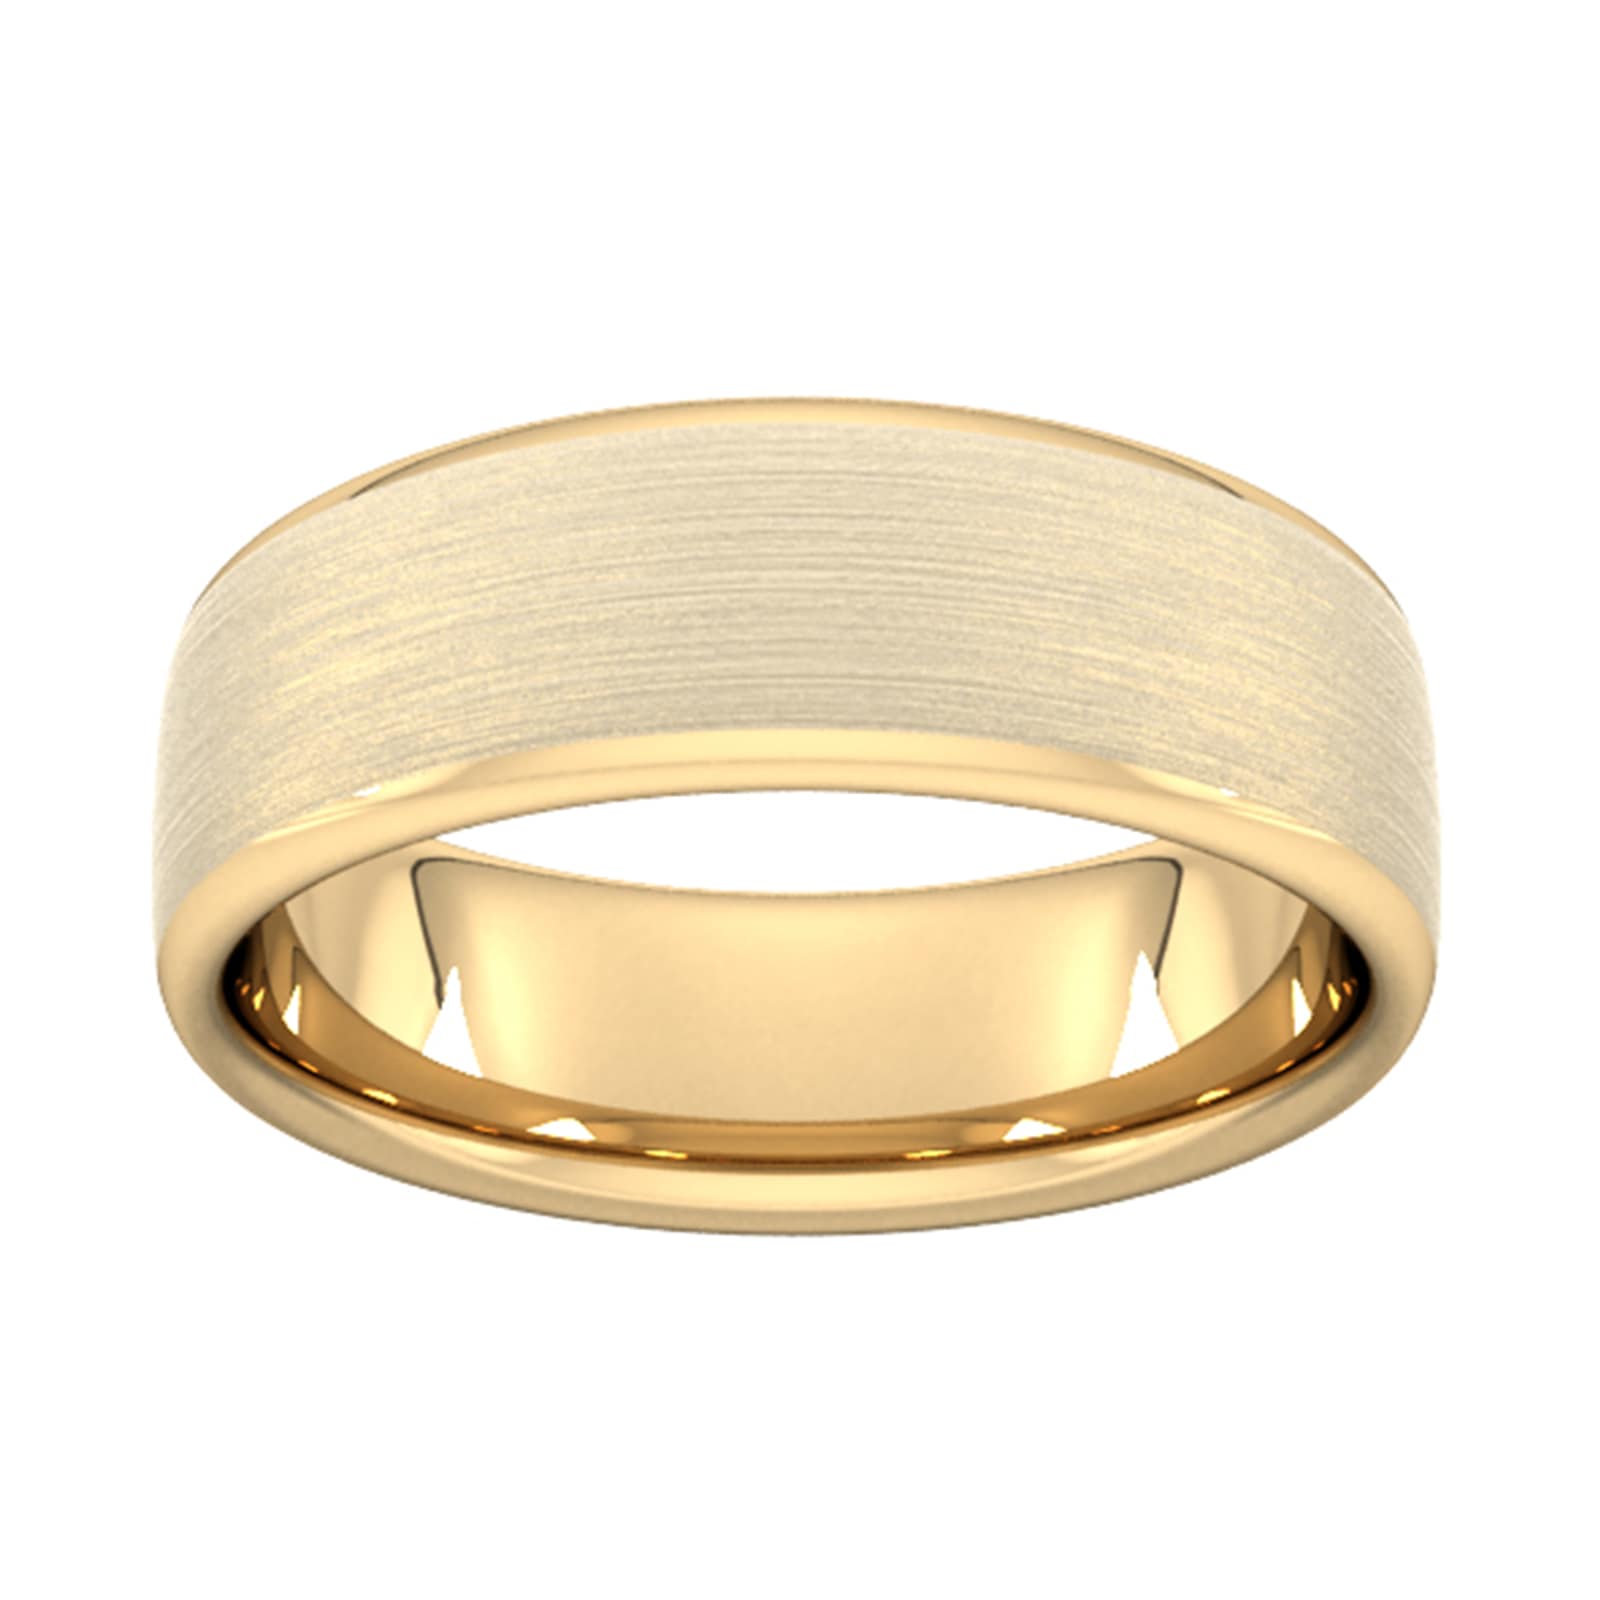 7mm Flat Court Heavy Matt Finished Wedding Ring In 9 Carat Yellow Gold - Ring Size R